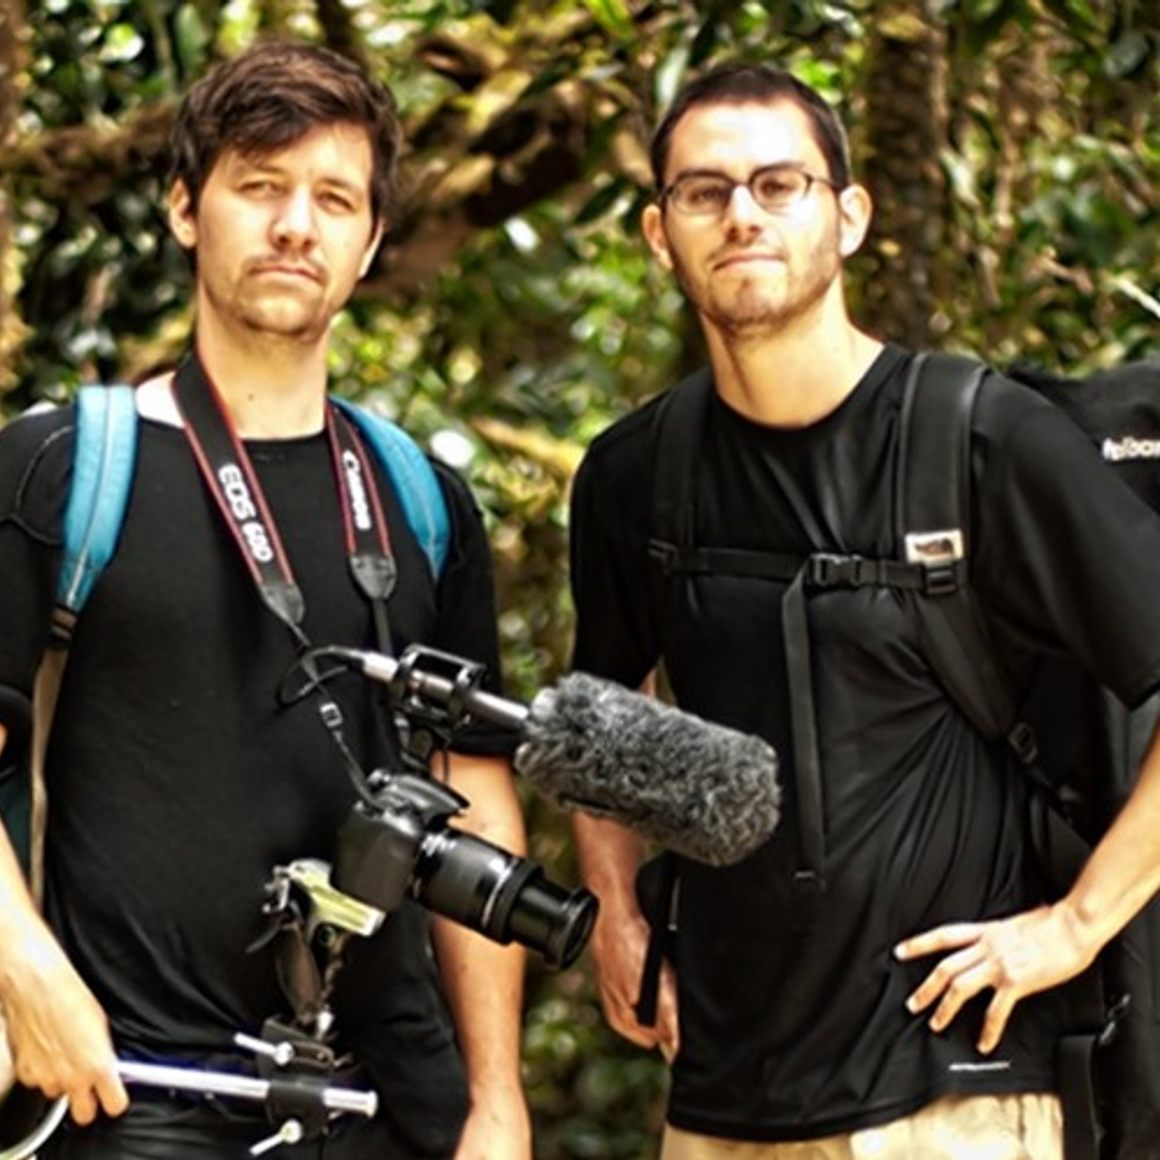 Atlas Obscura founders Dylan Thuras and Josh Foer